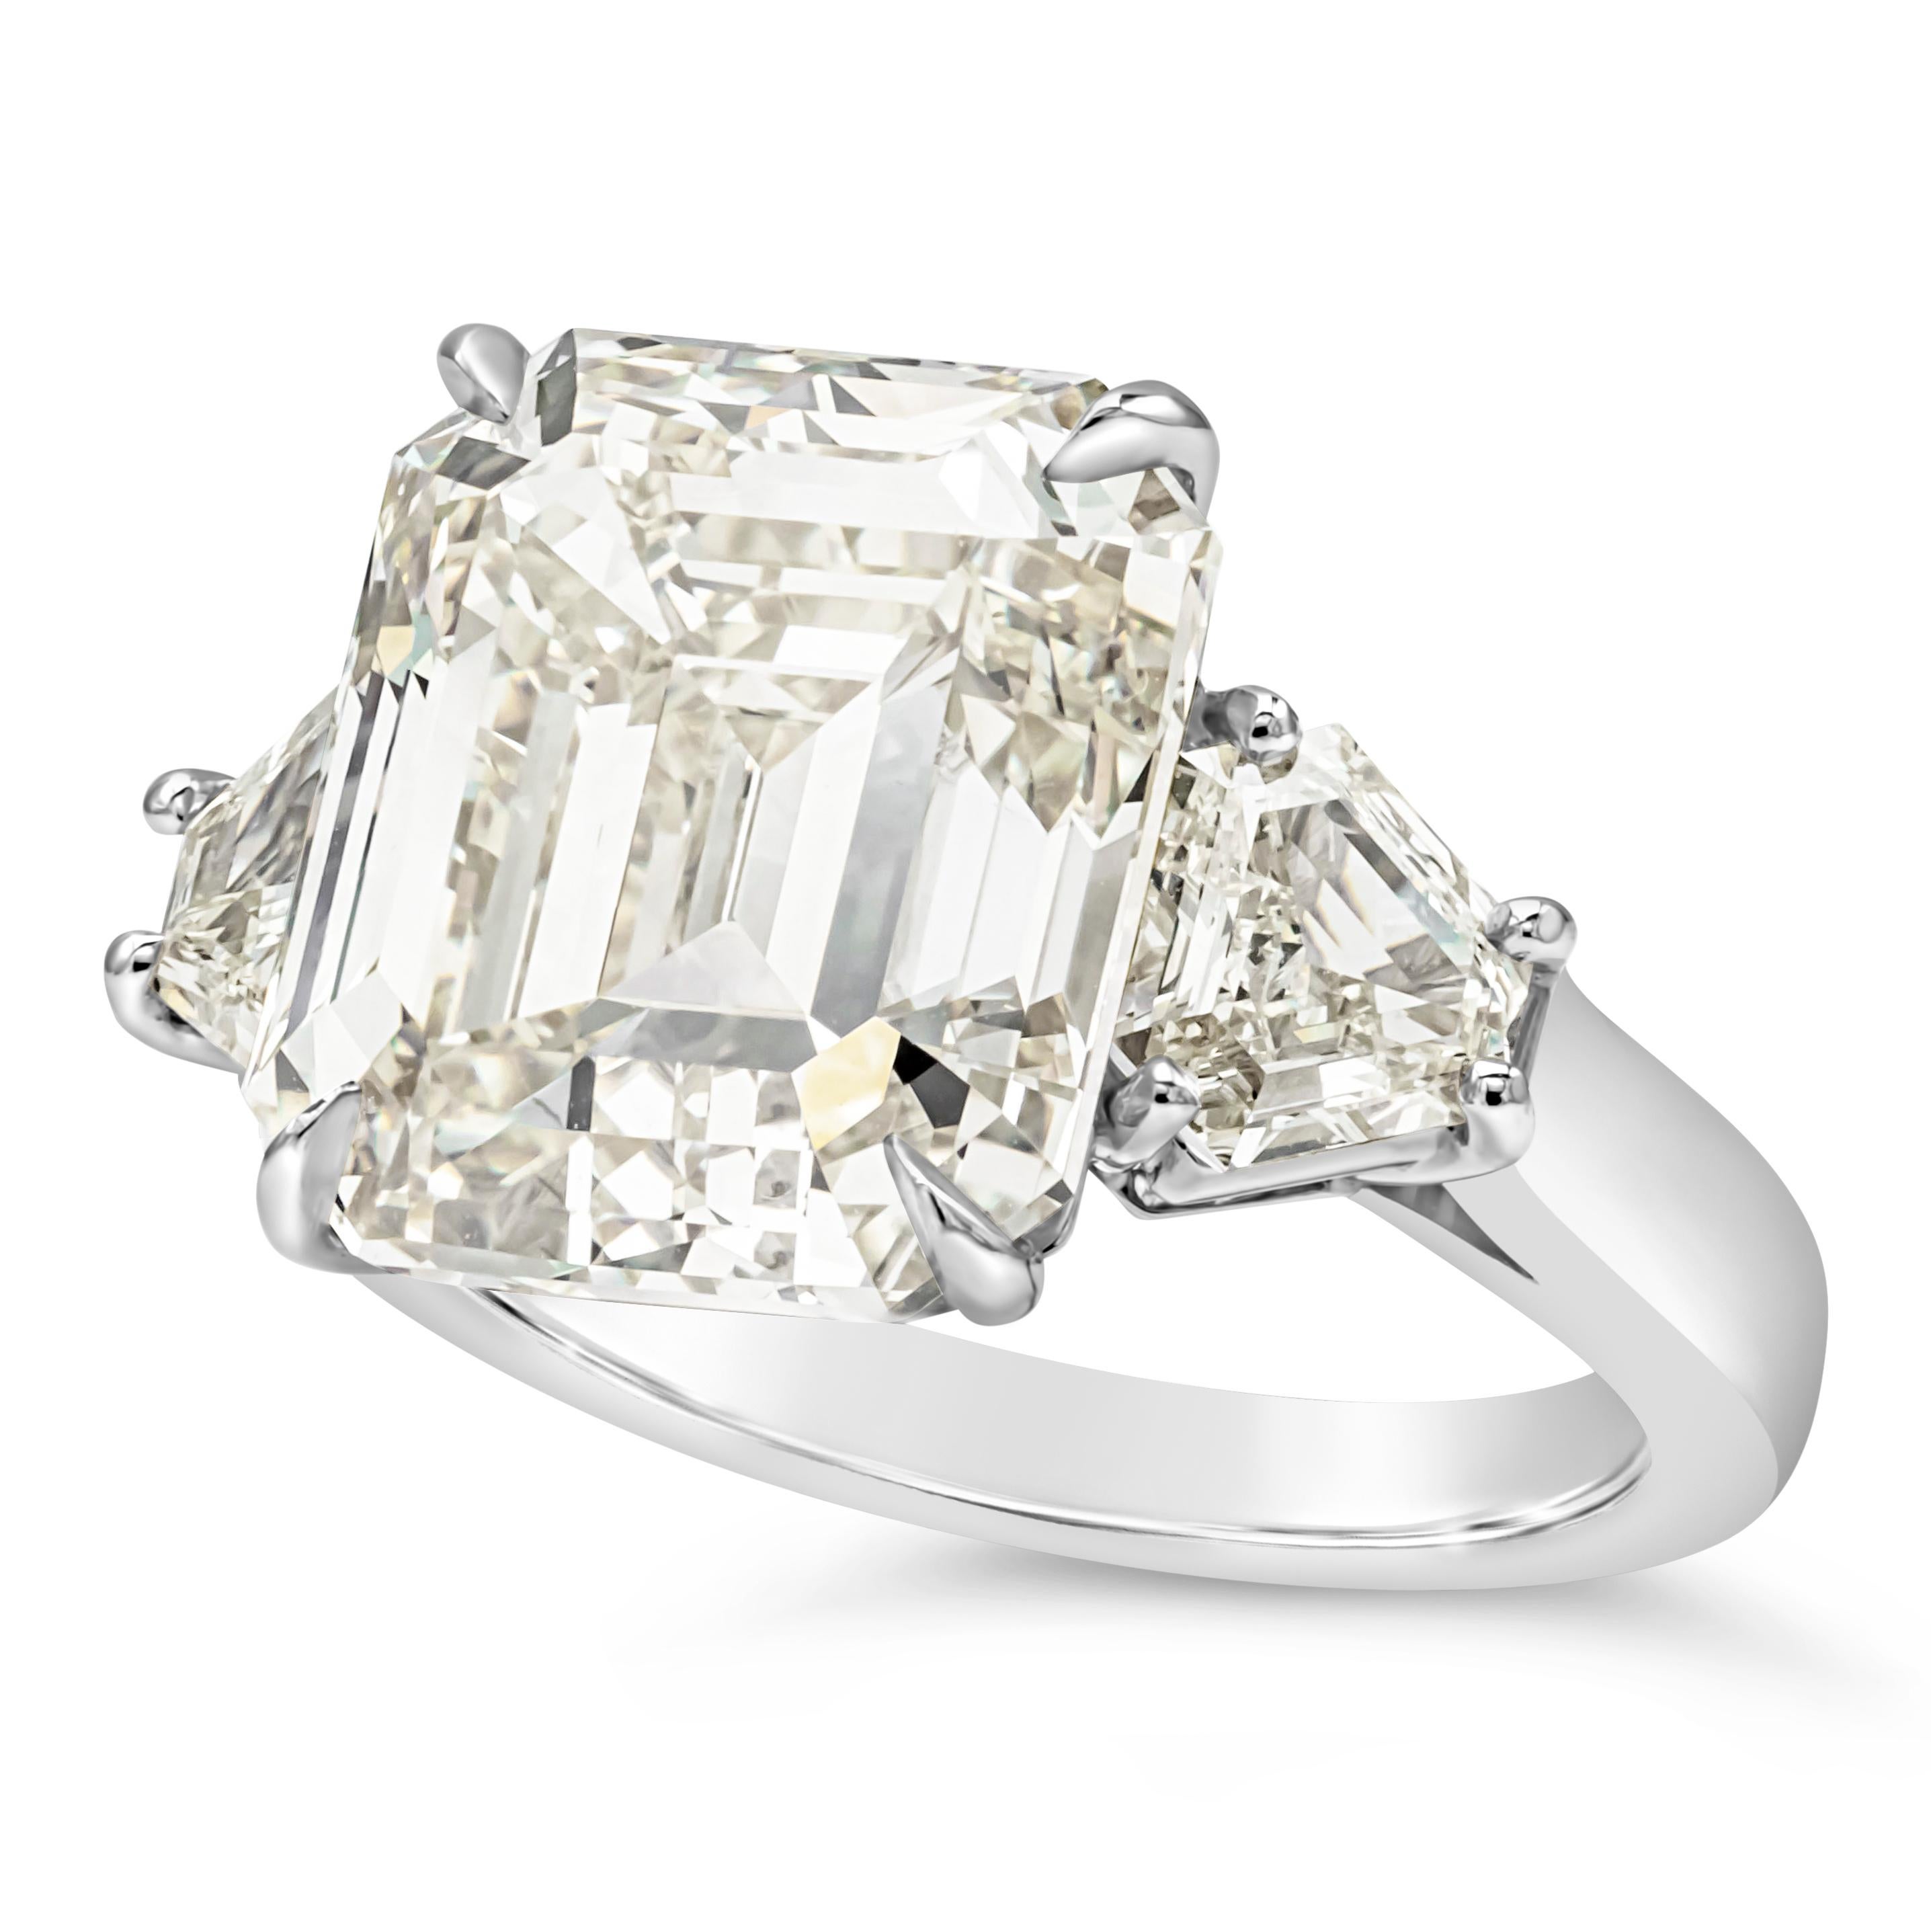 Elegantly made three stone engagement ring features a 11.11 carats emerald cut diamond certified by IGI as M color, VS1 in clarity, set in platinum four prong setting. Flanked by shield step-cut diamonds on each side, weighing 1.11 carats total, M